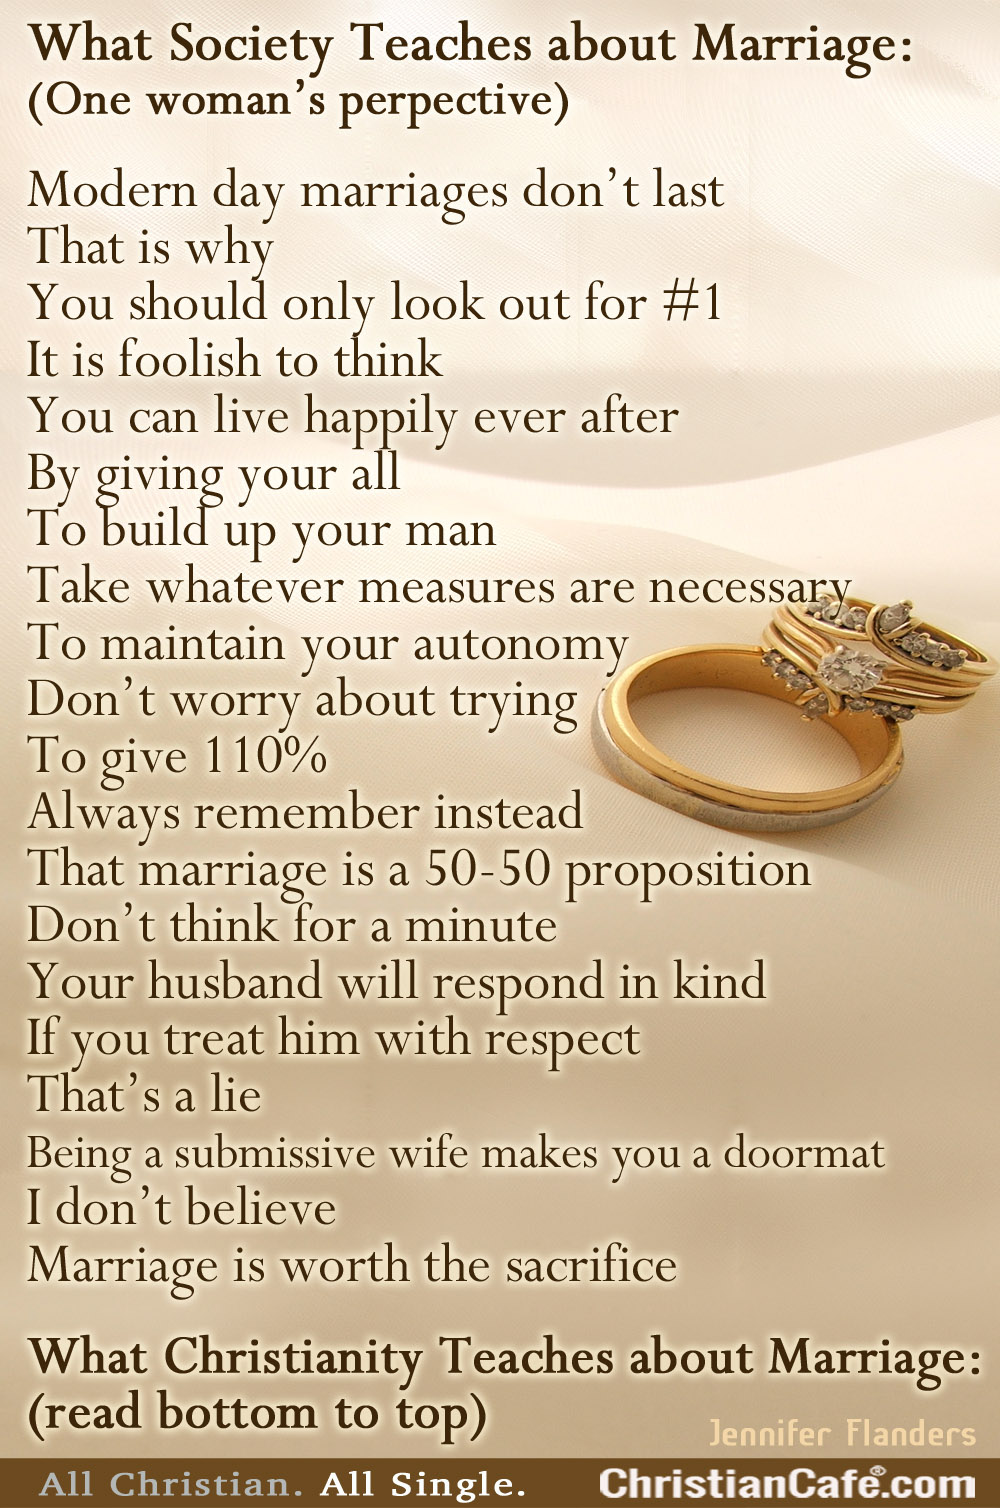 What Is Marriage? by Sherif Girgis